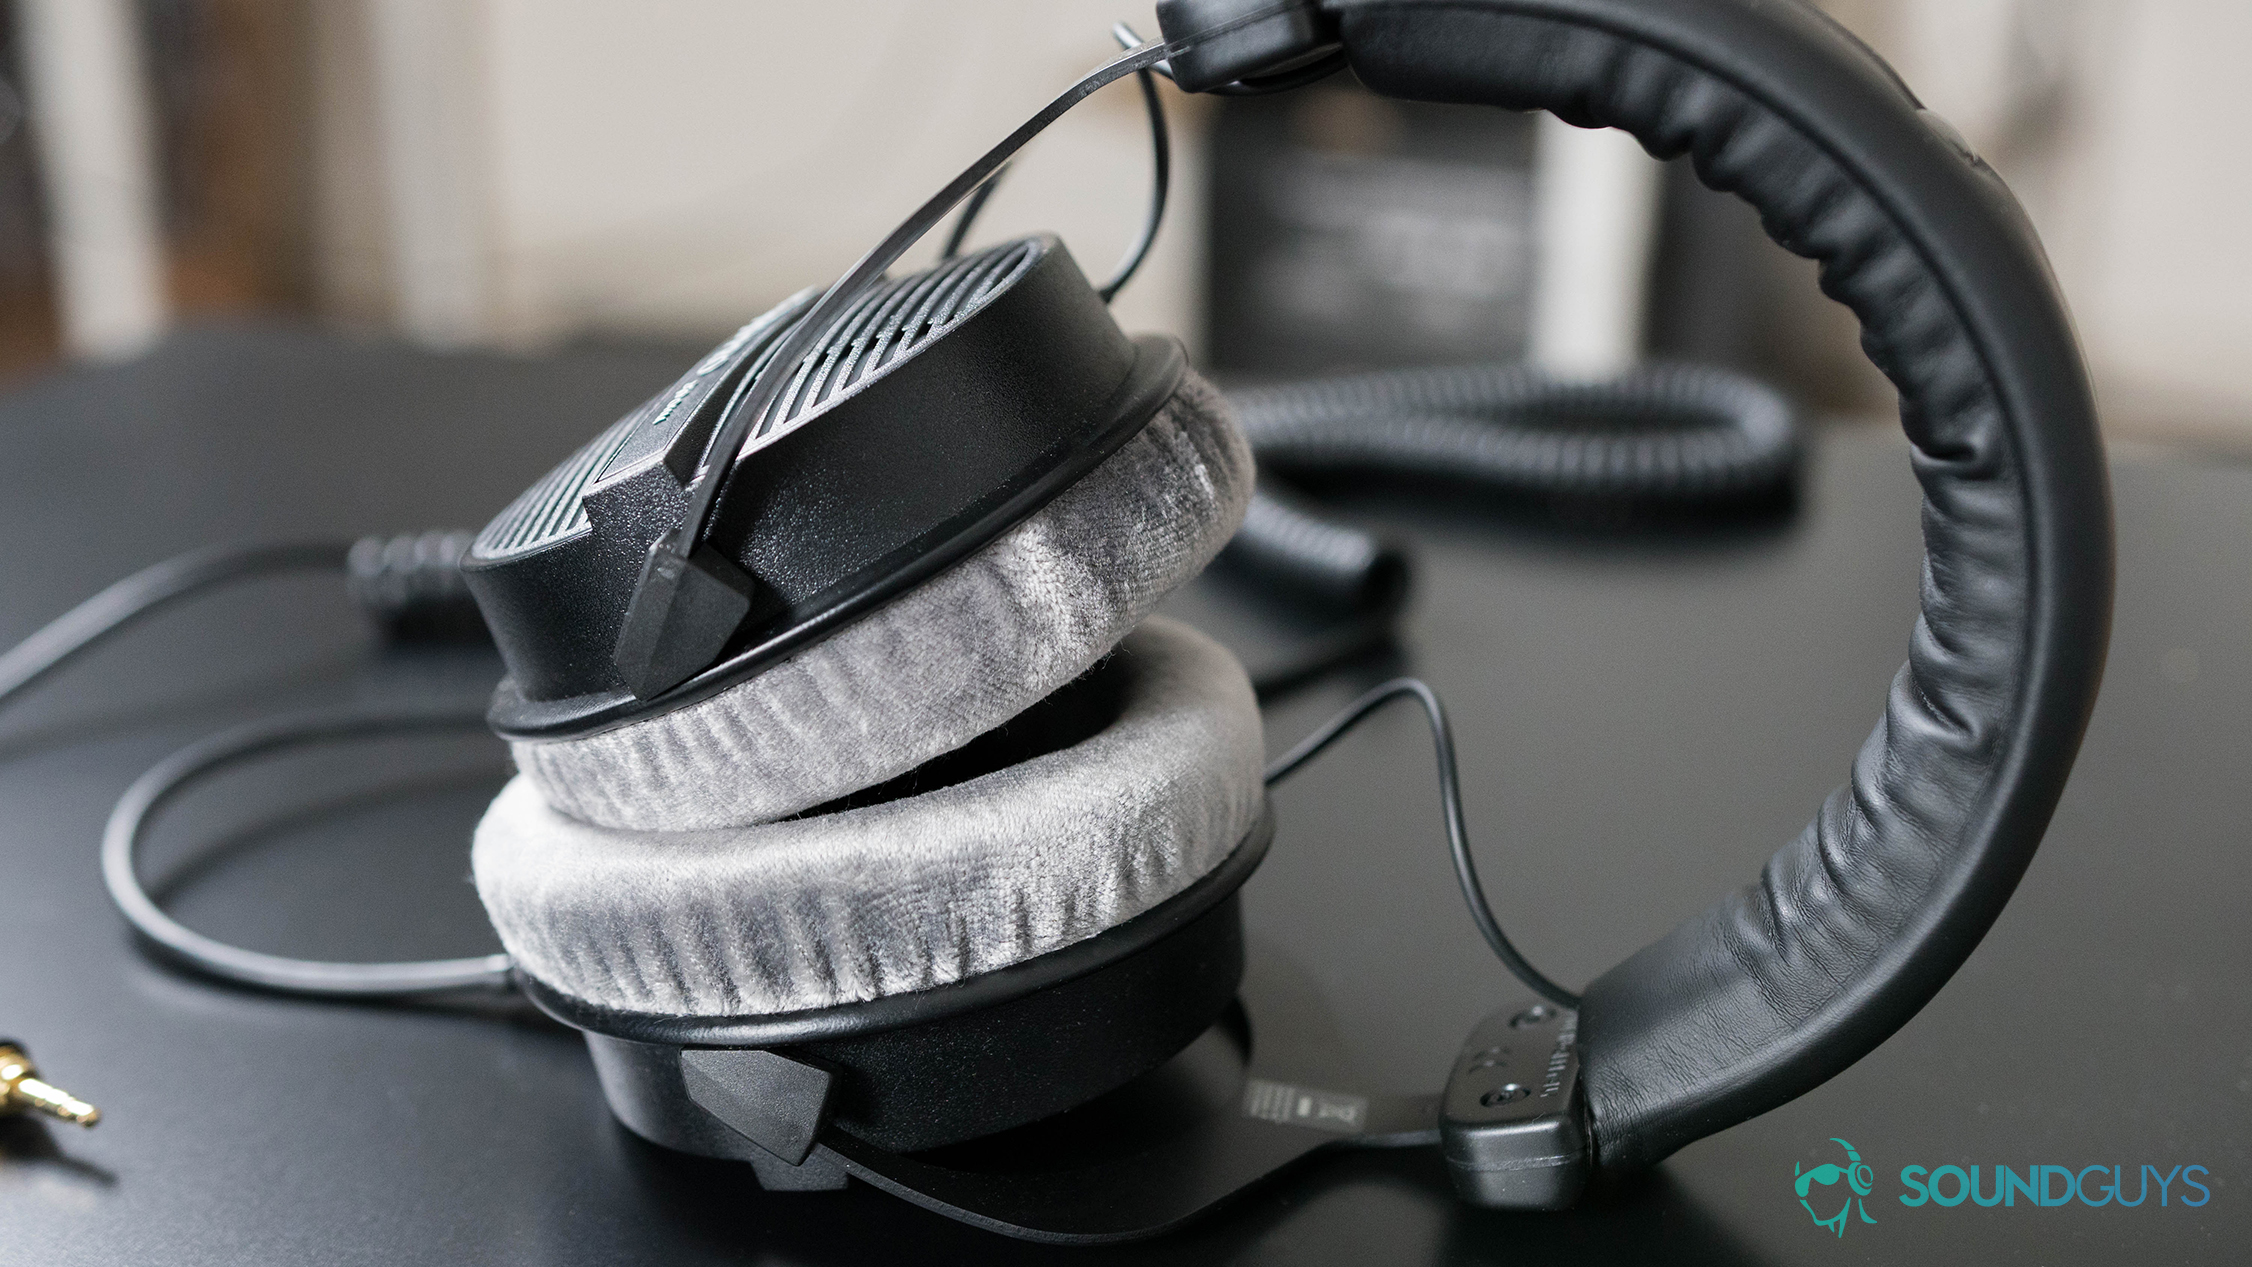 Best headphones under $200: A photo of the Beyerdynamic DT 990 PRO and its silver velour ear pads.